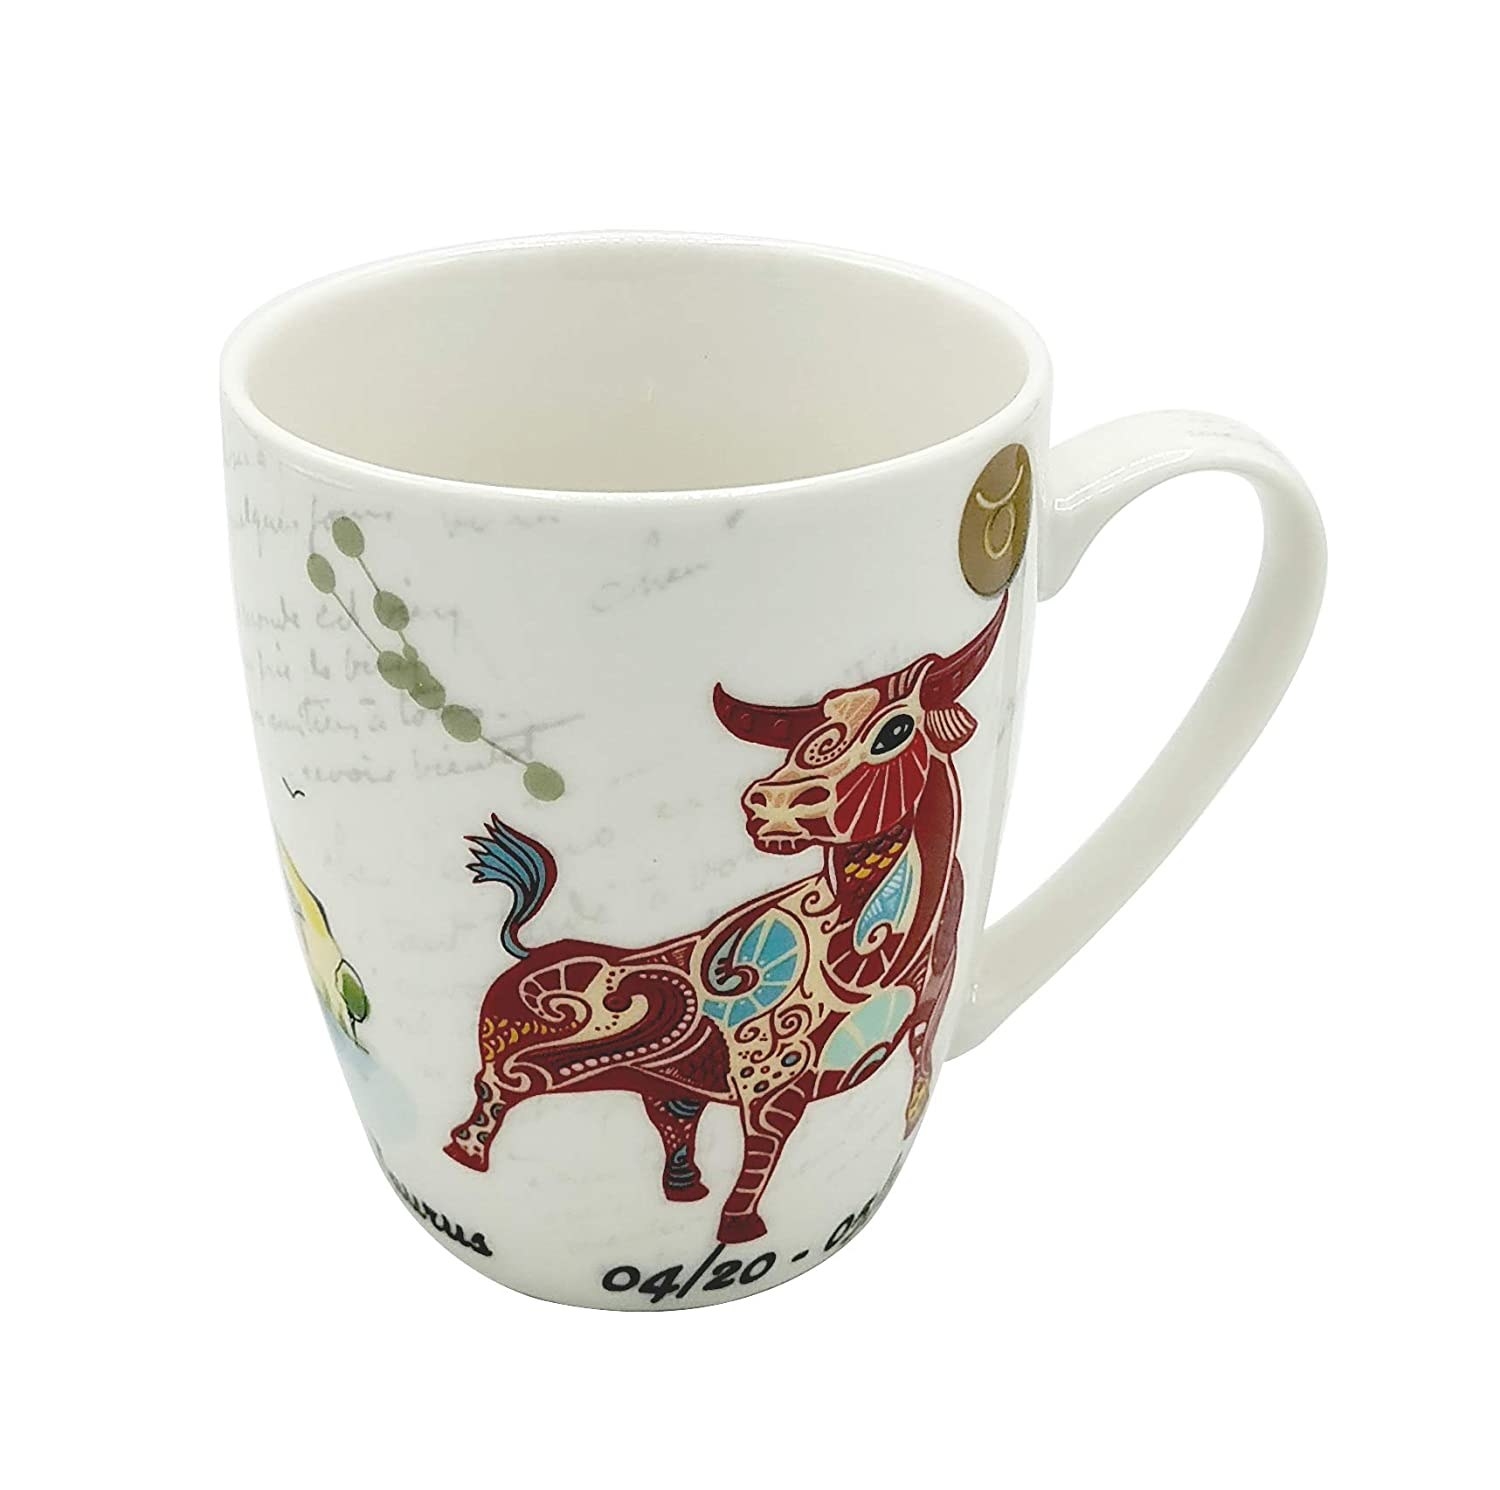 White mug with red Bull design with Taurus dates in black text